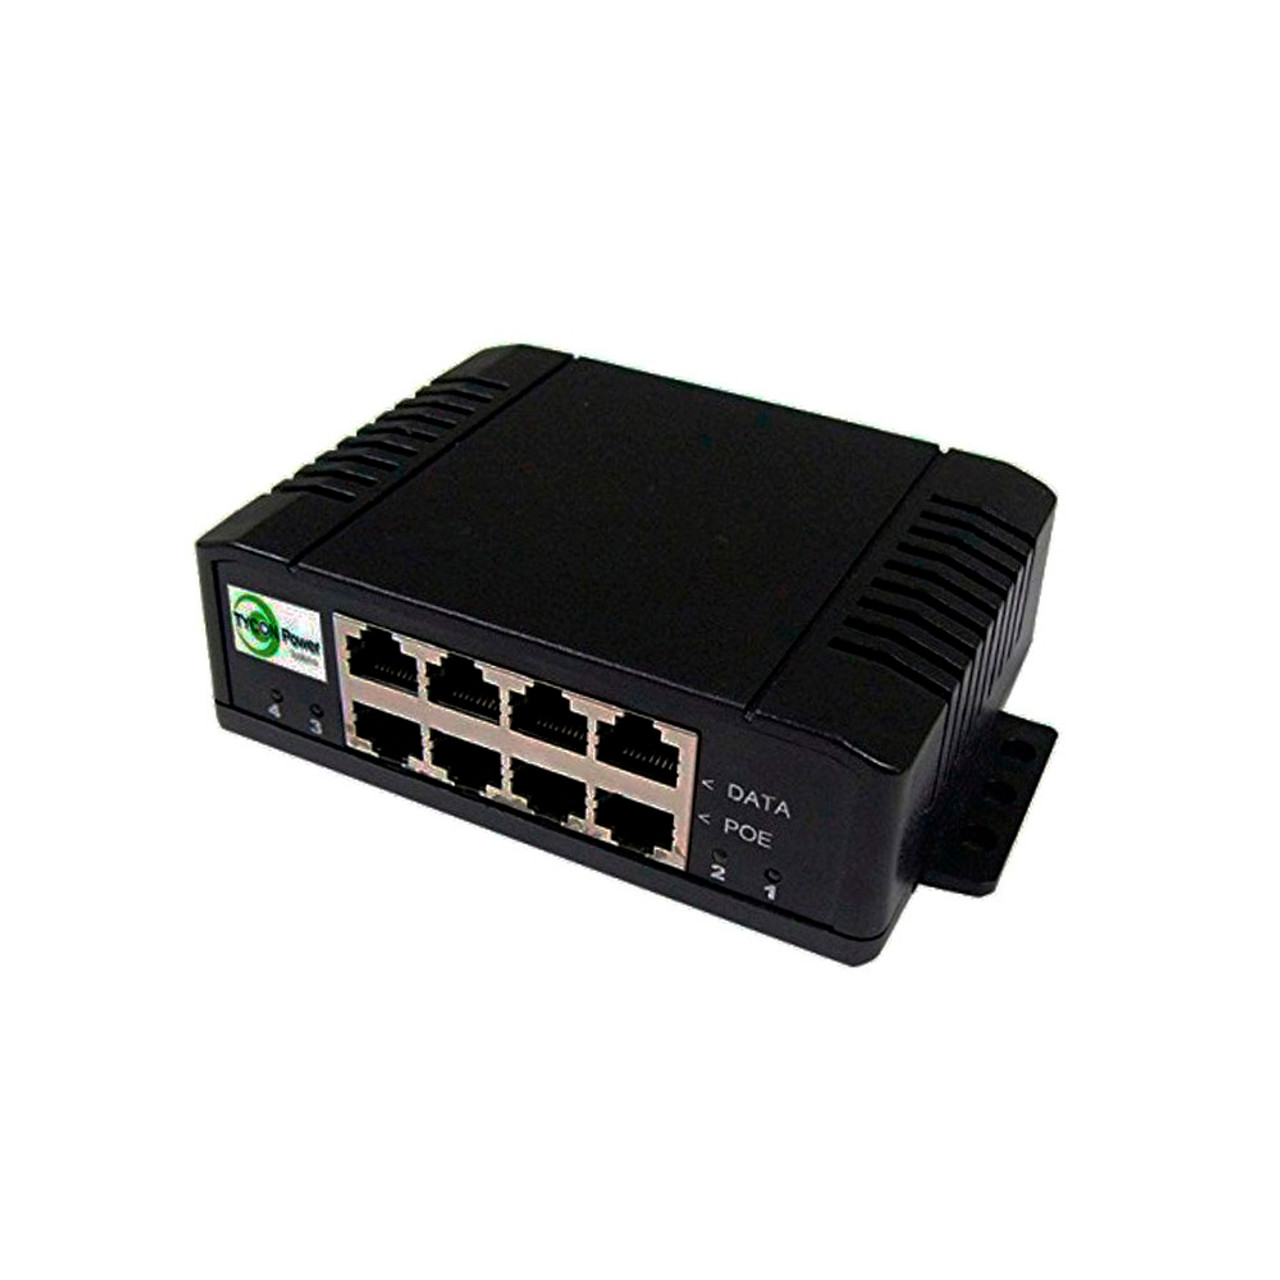 Tycon Mid Span. 1A per port. Gigabit PoE Injector. 4 ports with 1-4